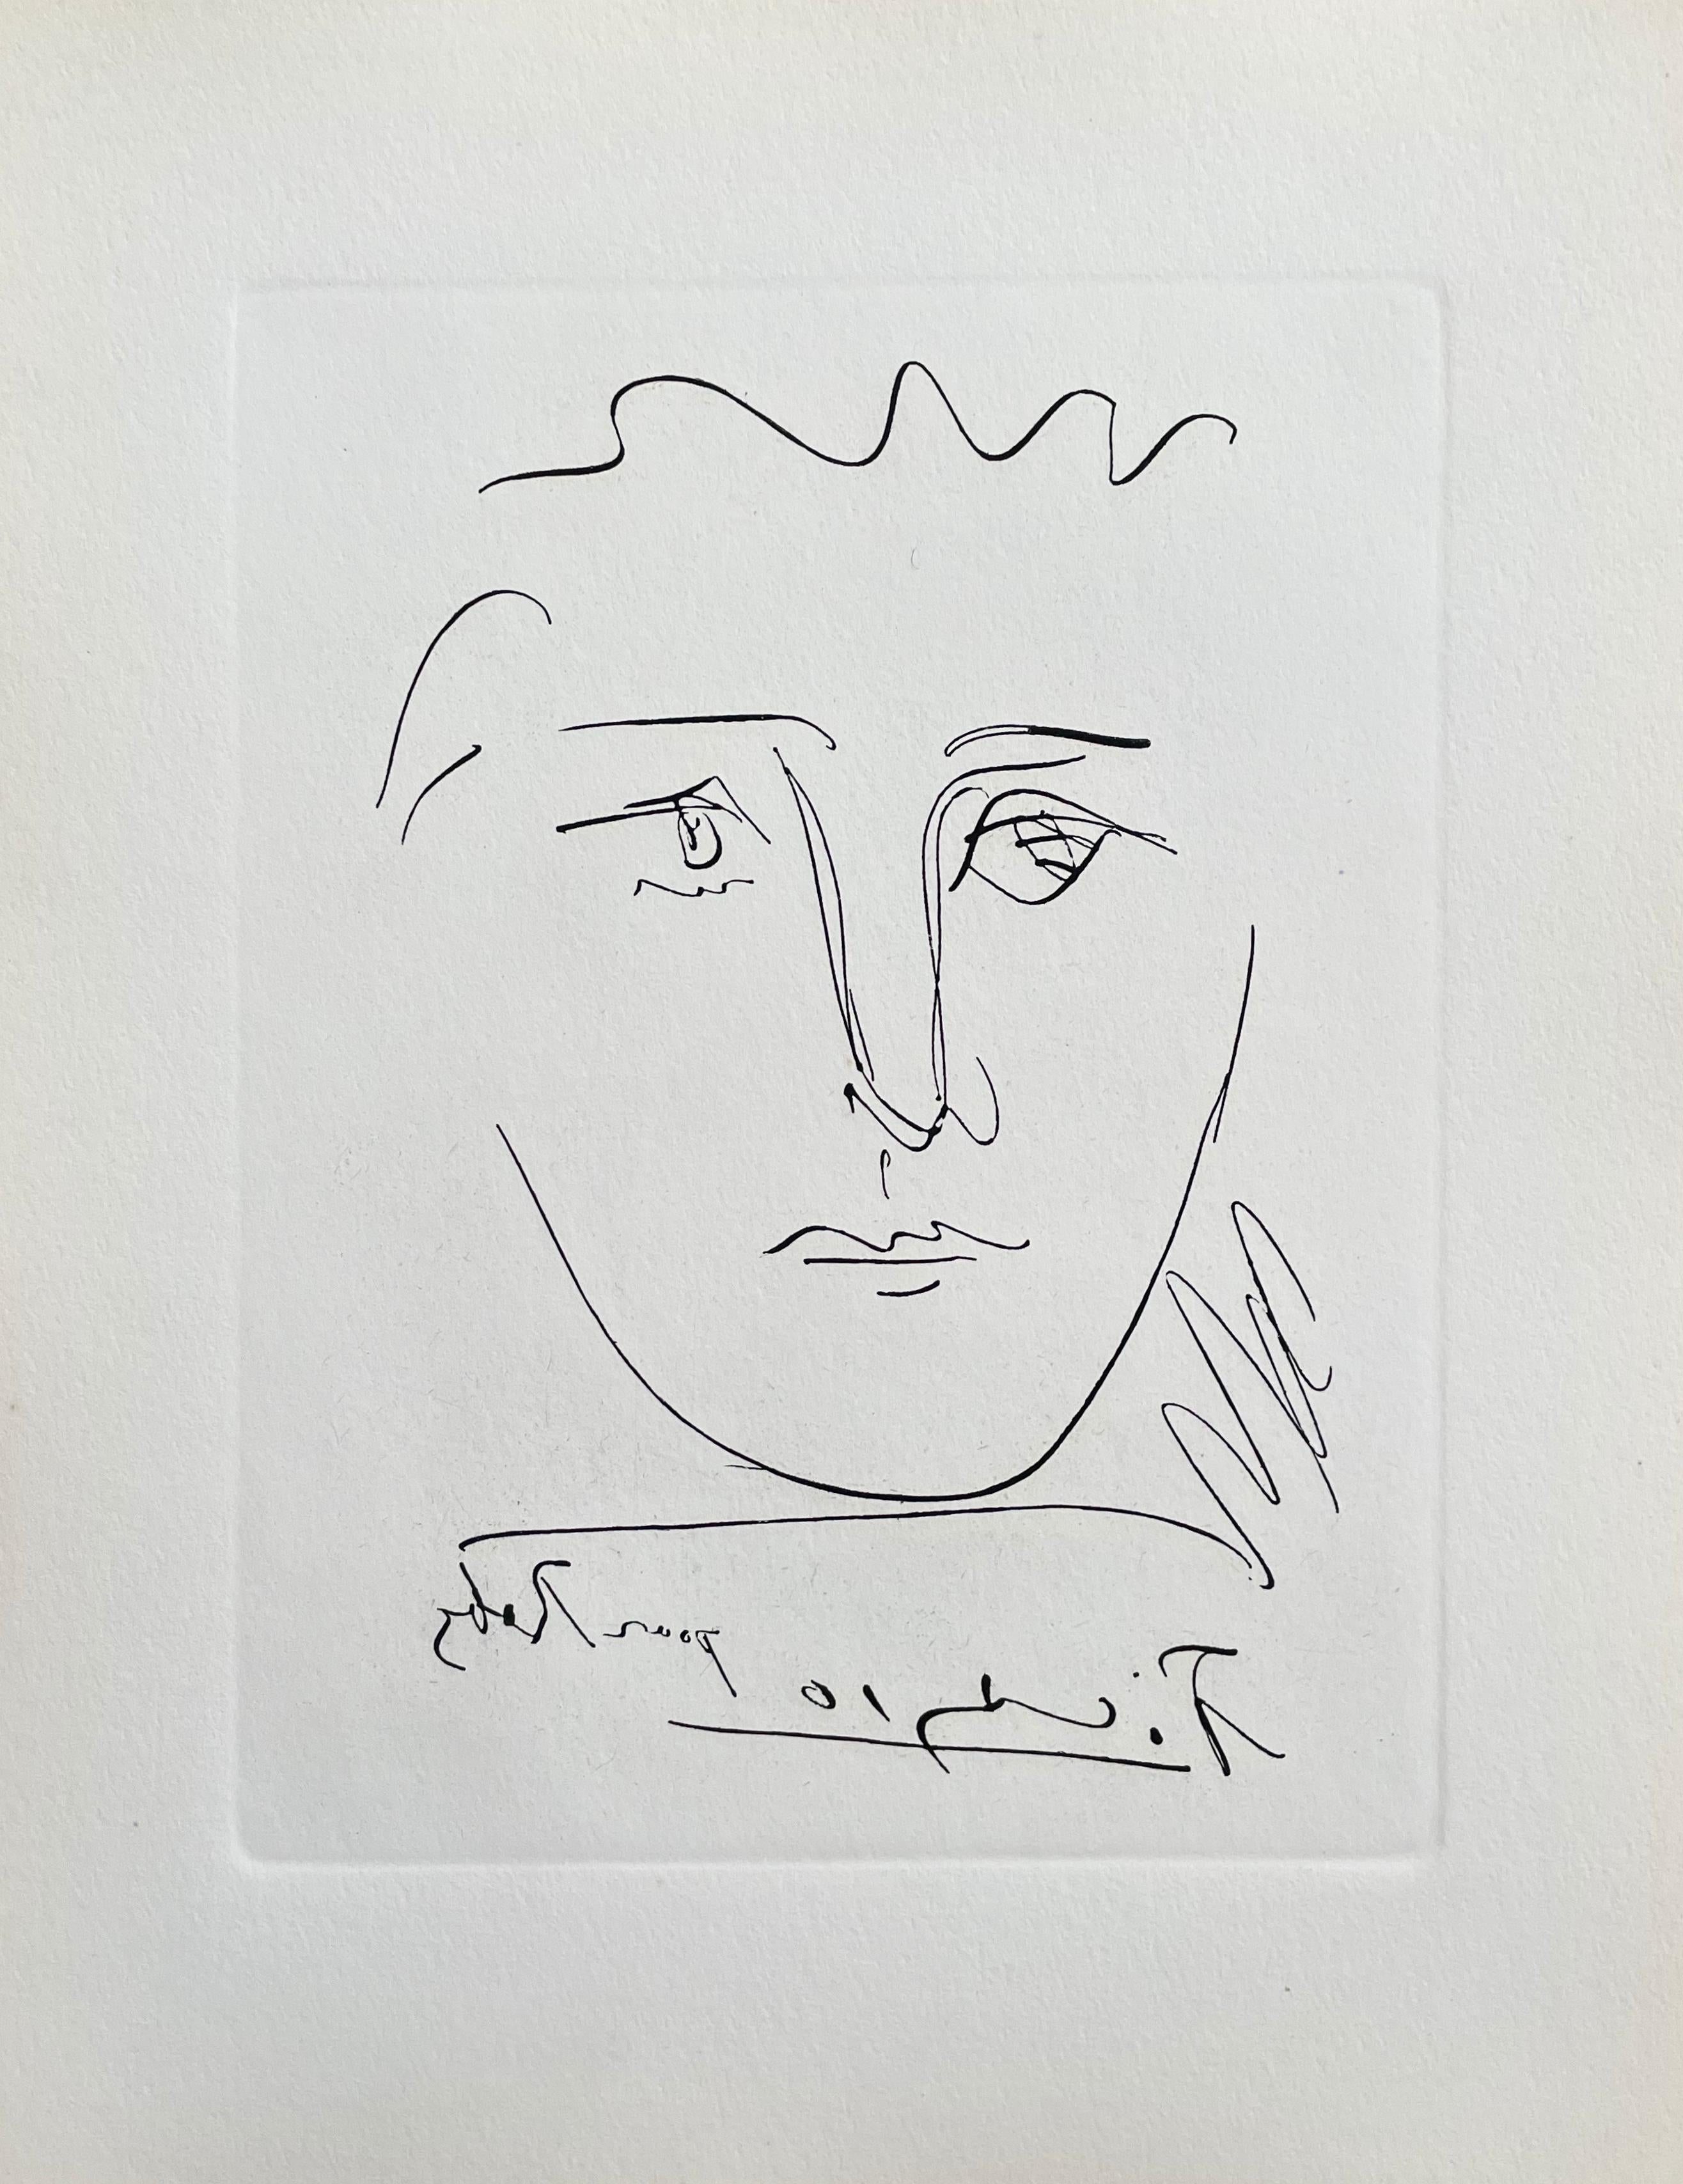 picasso sketches for sale